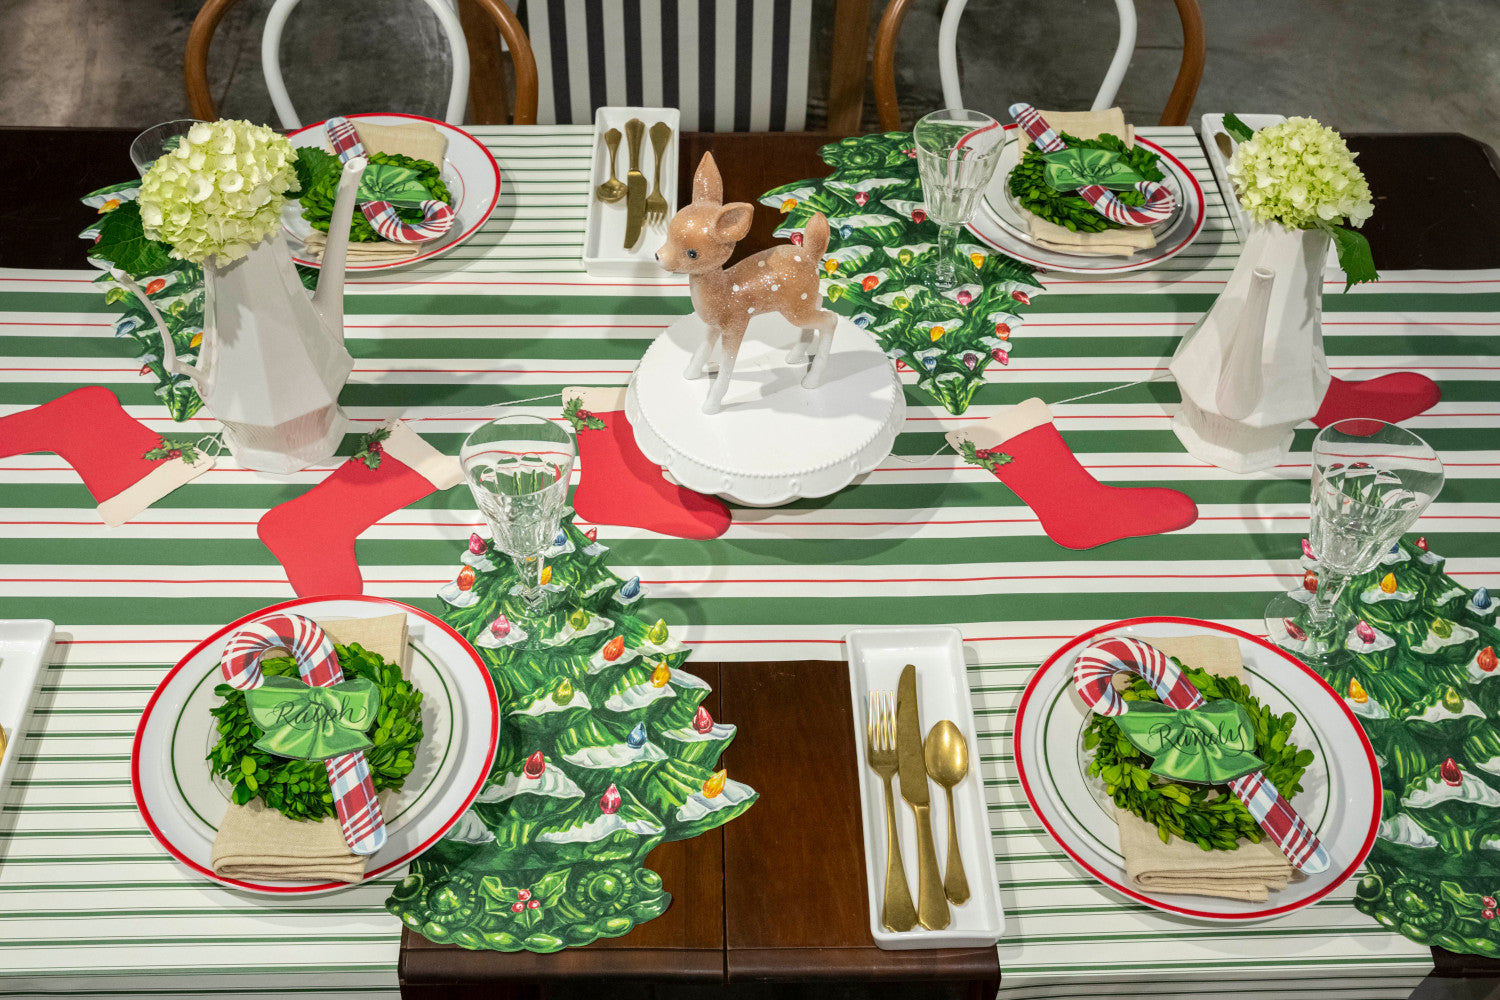 The Green &amp; Red Awning Stripe Runner under a festive Christmas-themed table setting for four.